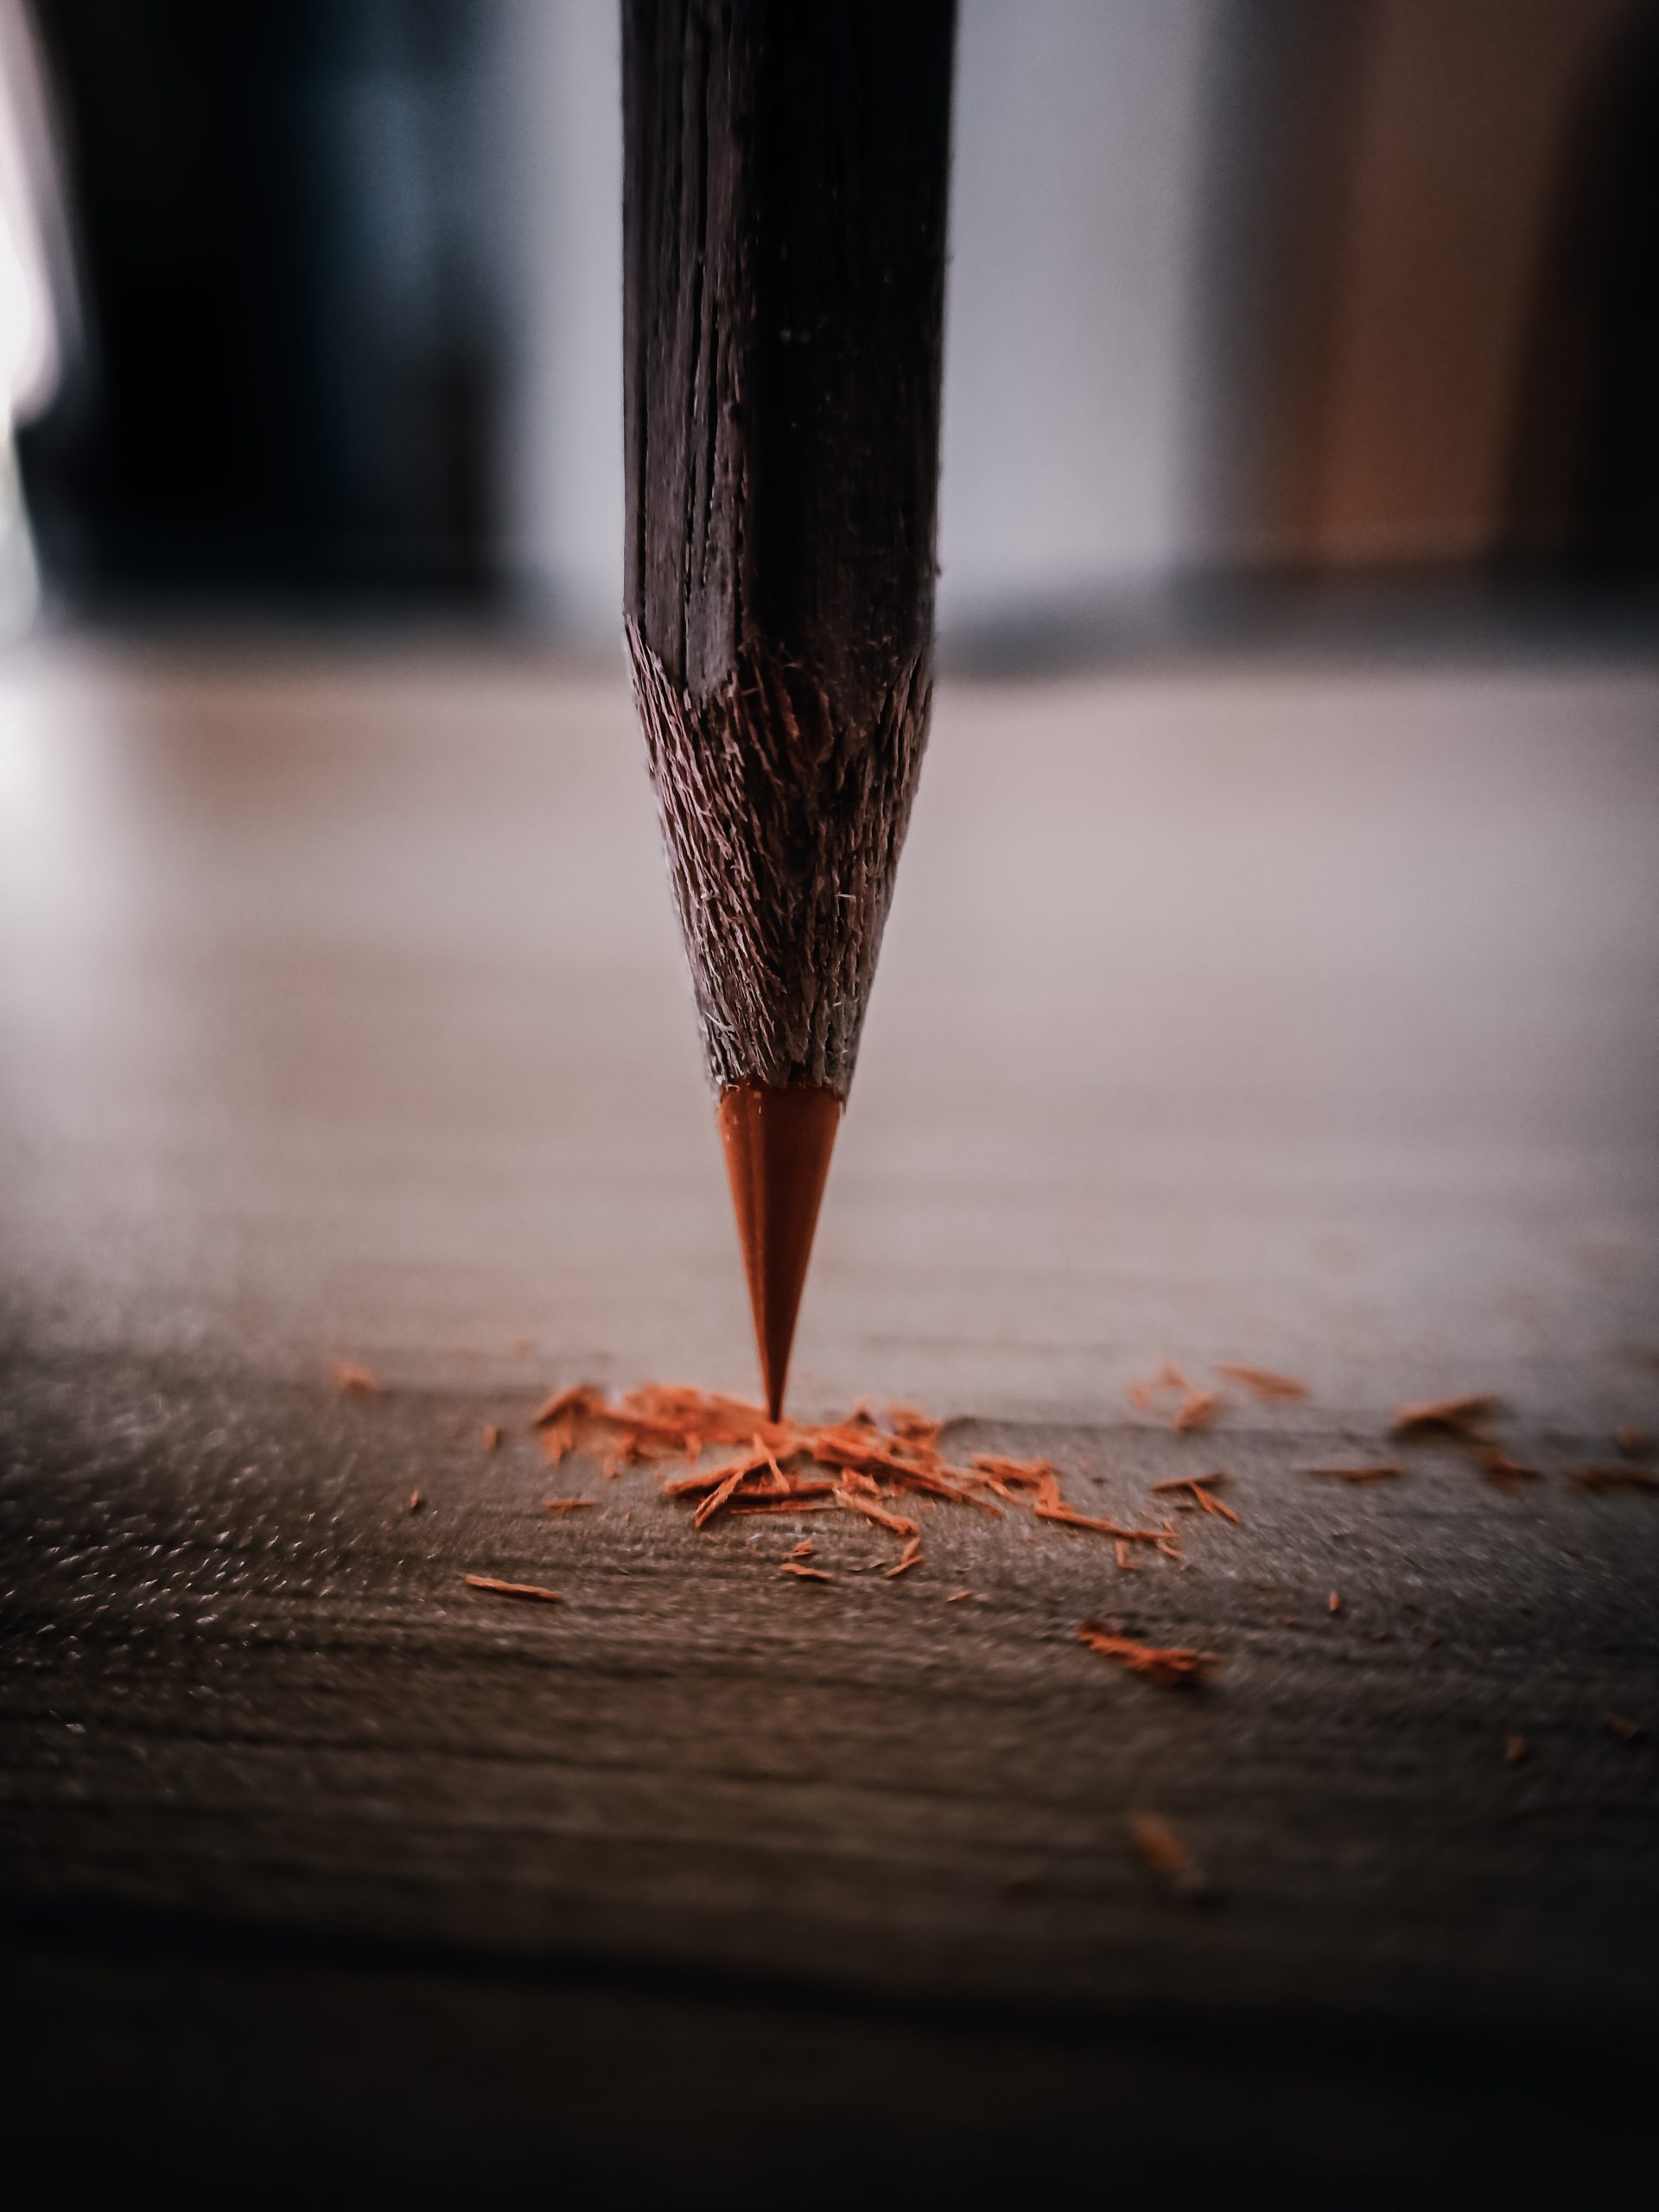 Sharp point of Pencil